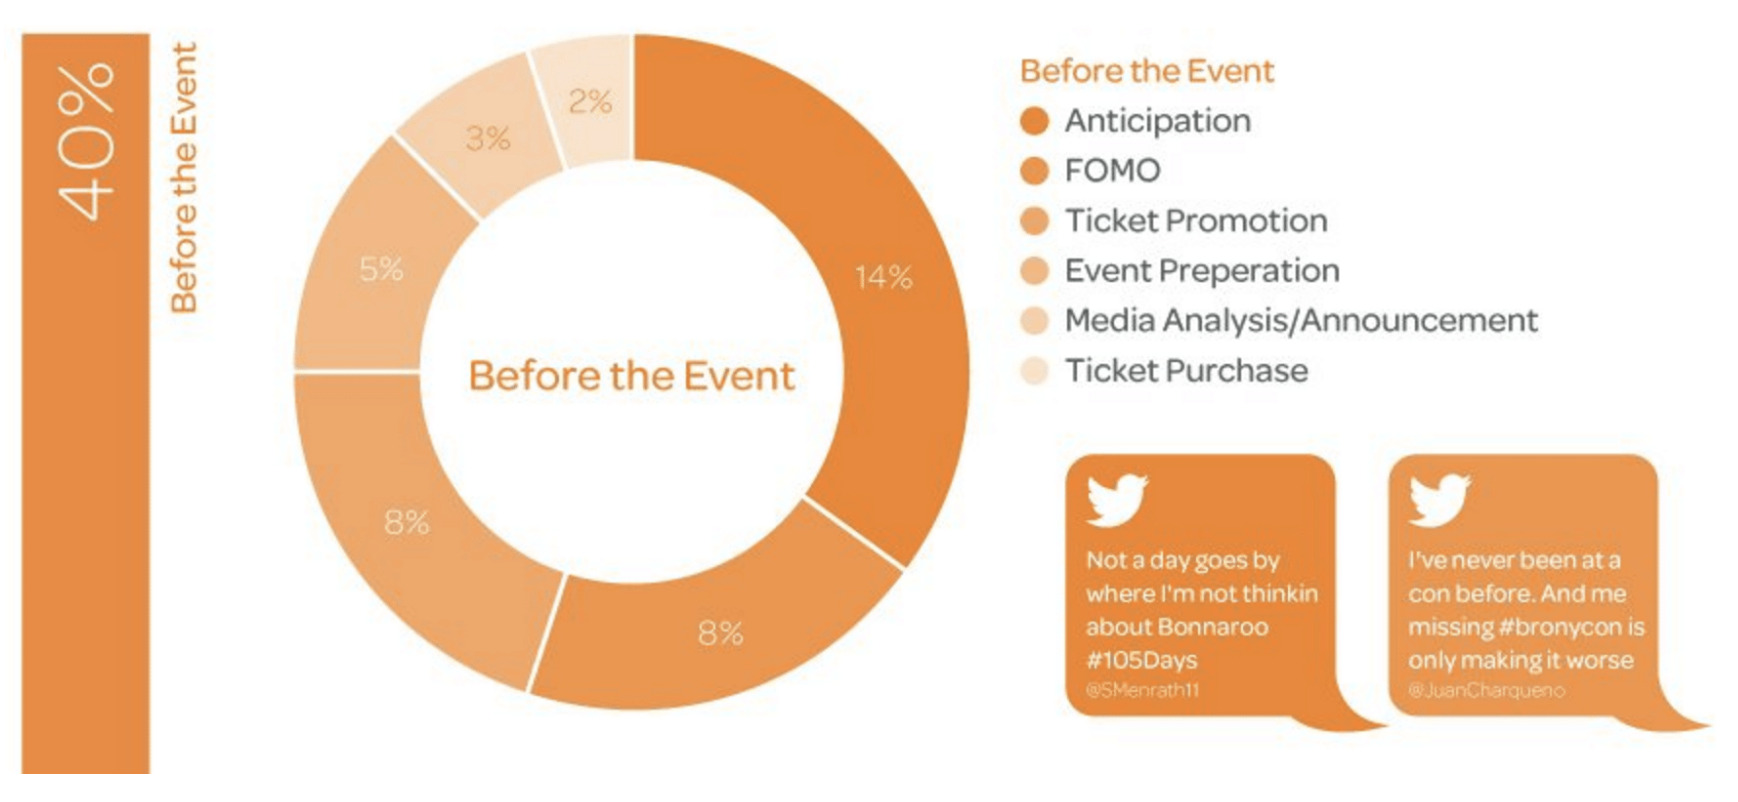 Buffer study on social engagement before an event